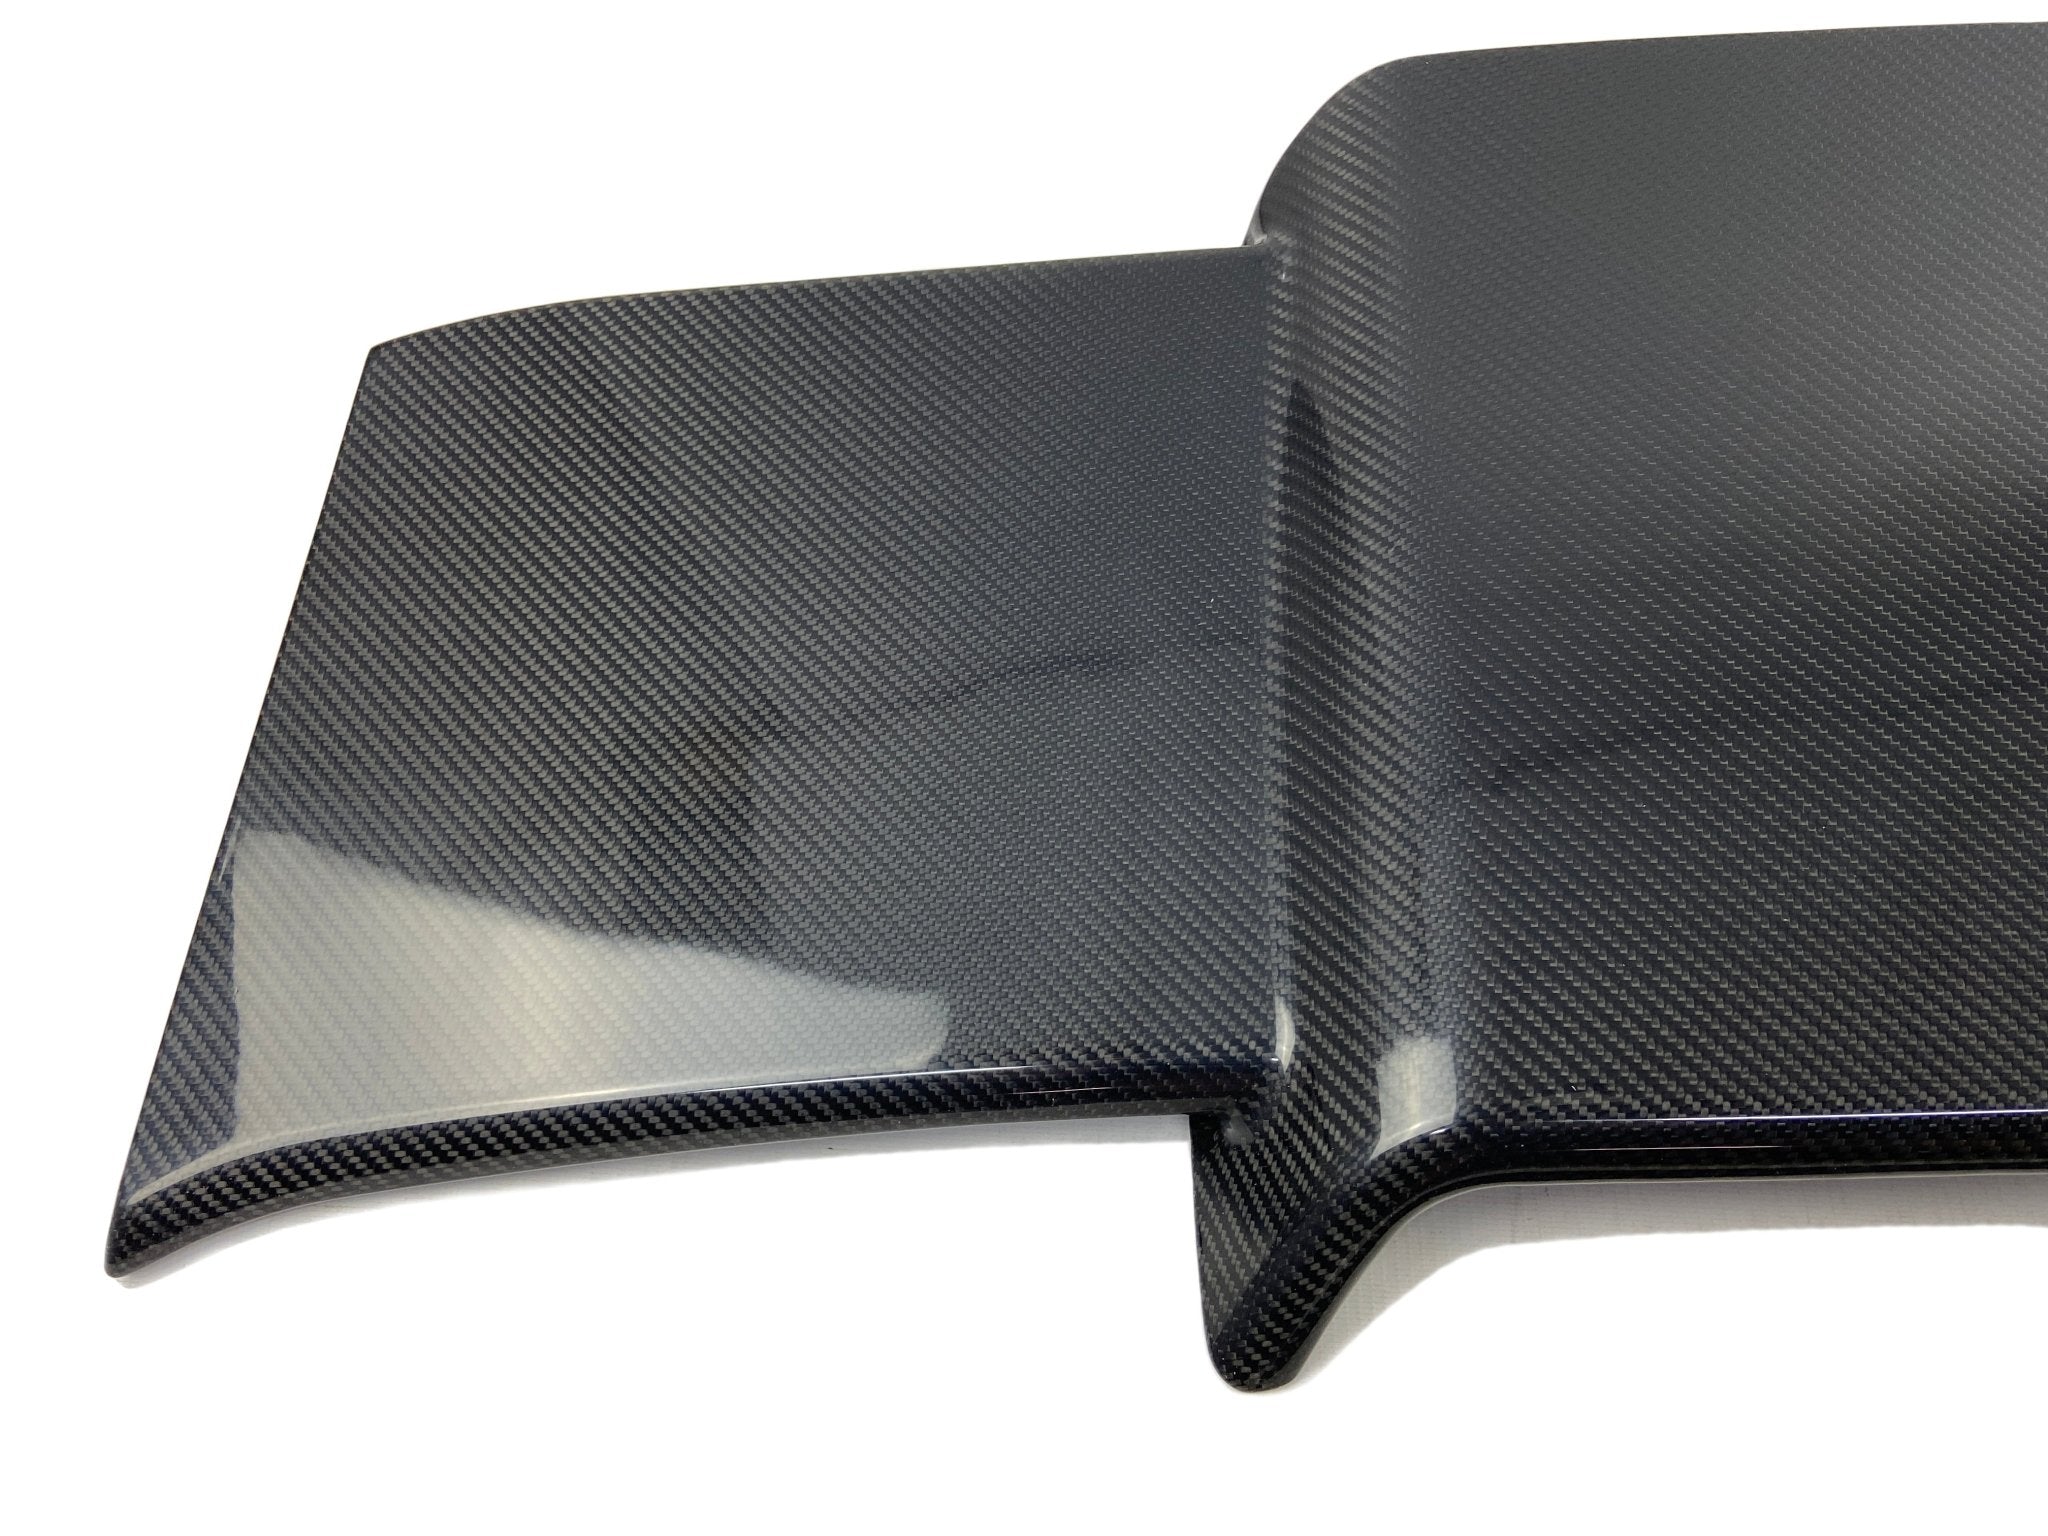 Mercedes-Benz W463A G-Class Rear Roof Carbon Spoiler with Badges